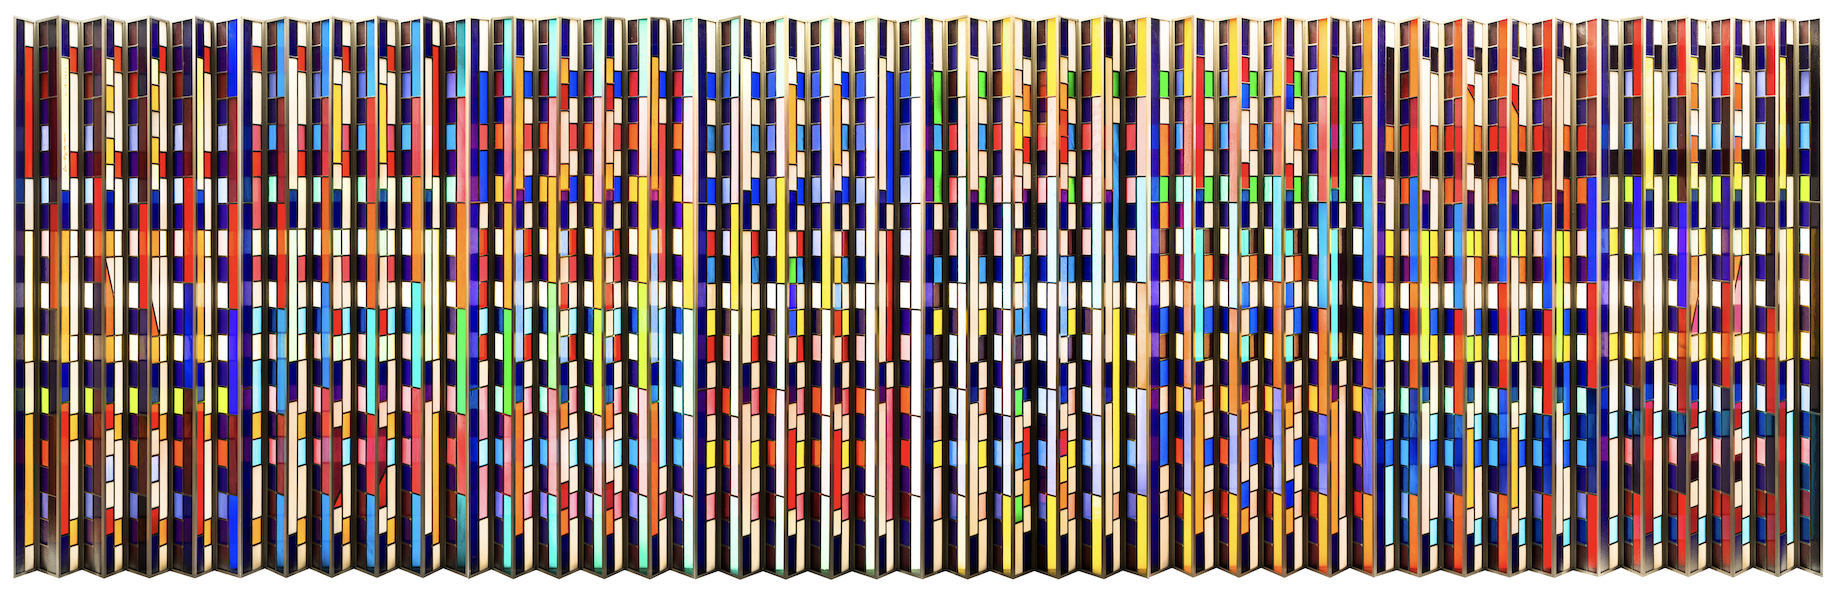 Yaacov Agam double-sided polymorph window installation, created for the Spreckels Theater in San Diego, estimated at $200,000-$300,000